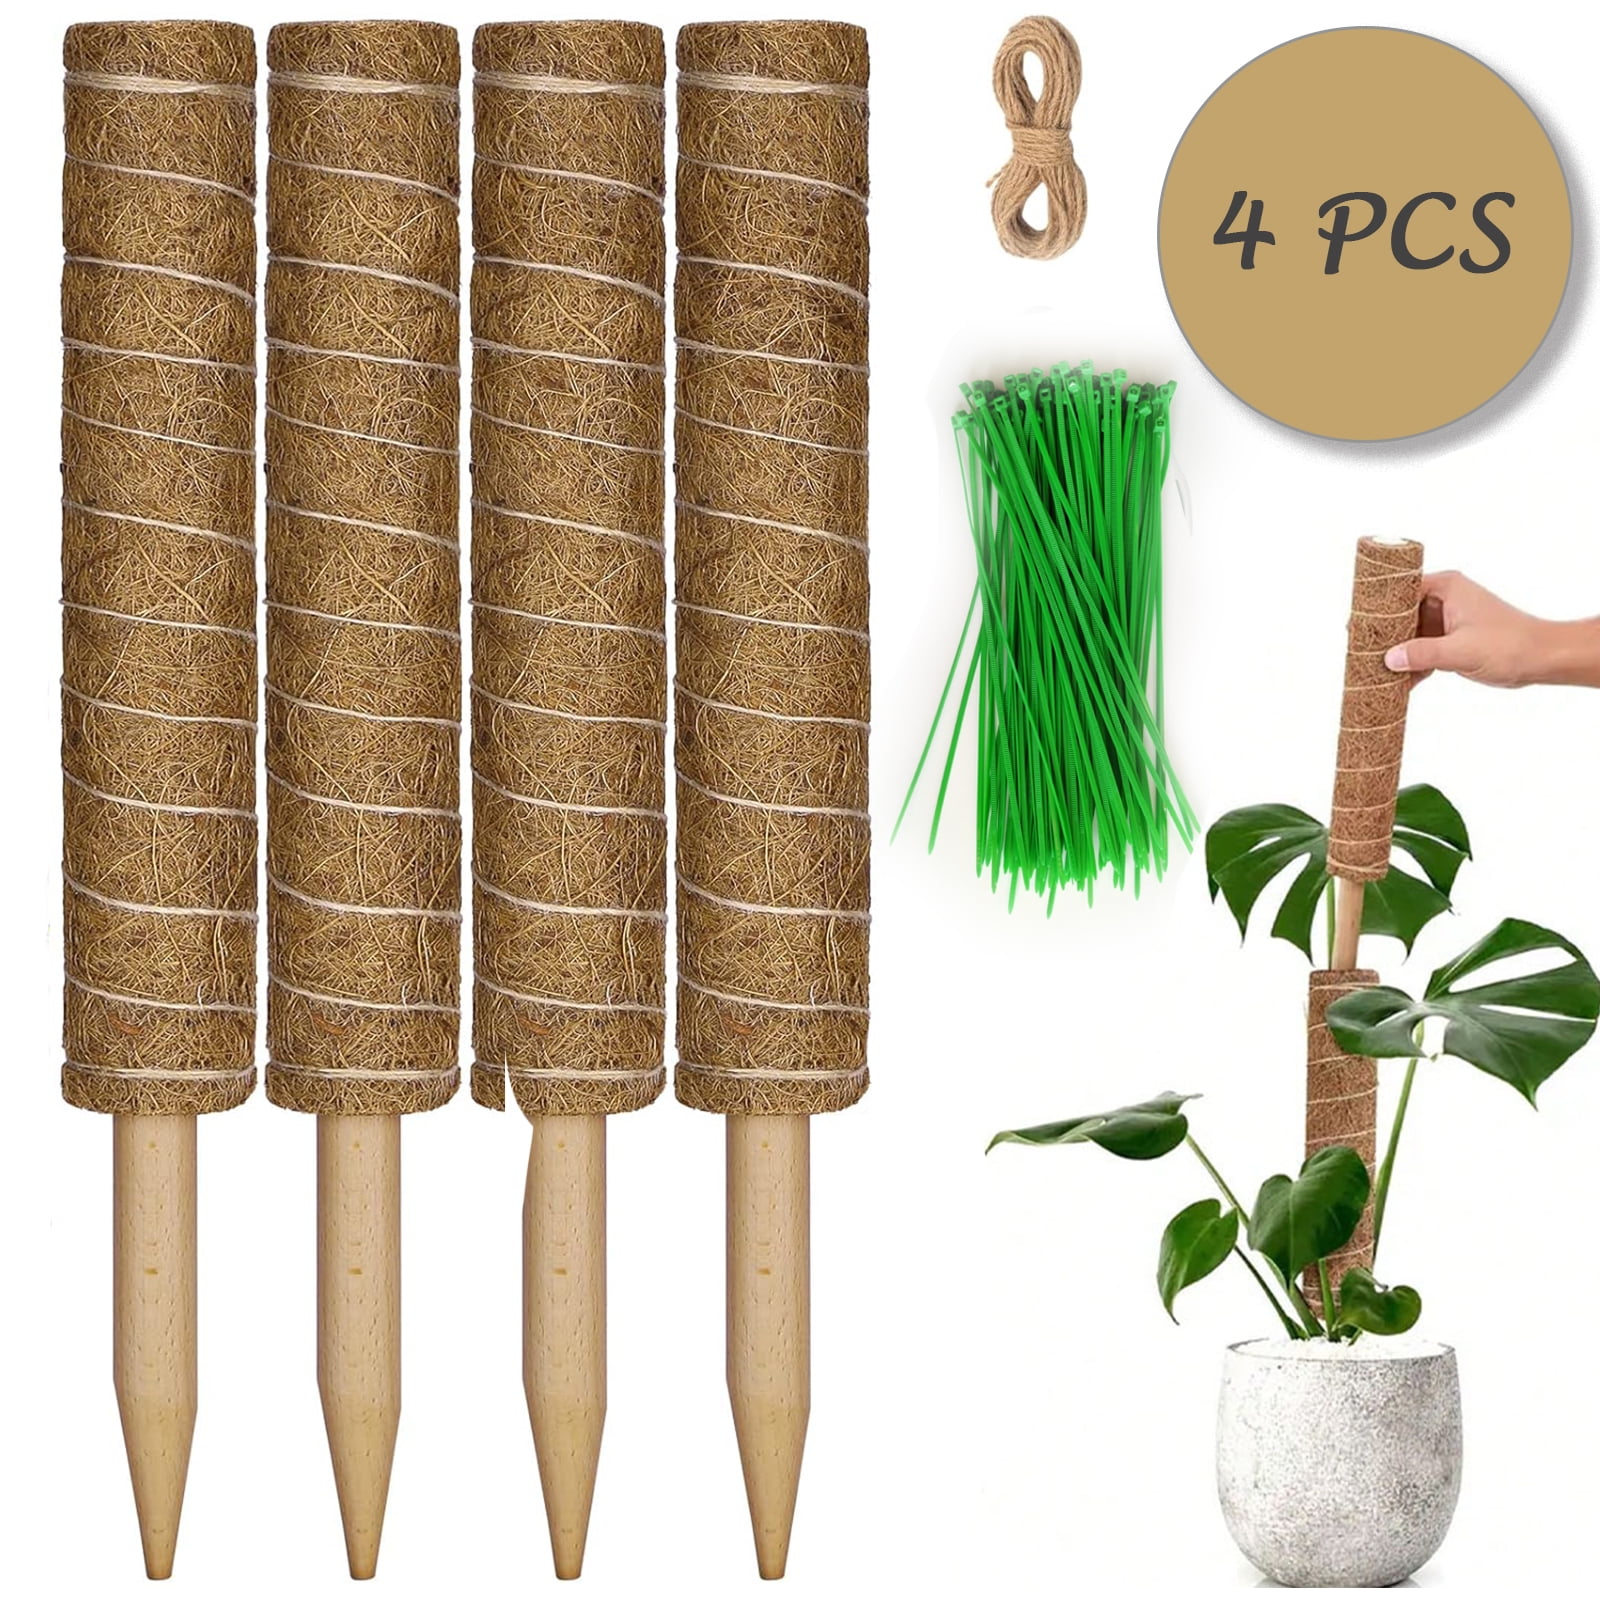 15 x 6FT (14-16mm) Bamboo Canes/Stake/ Pole Garden Plant Flower Support  Stick